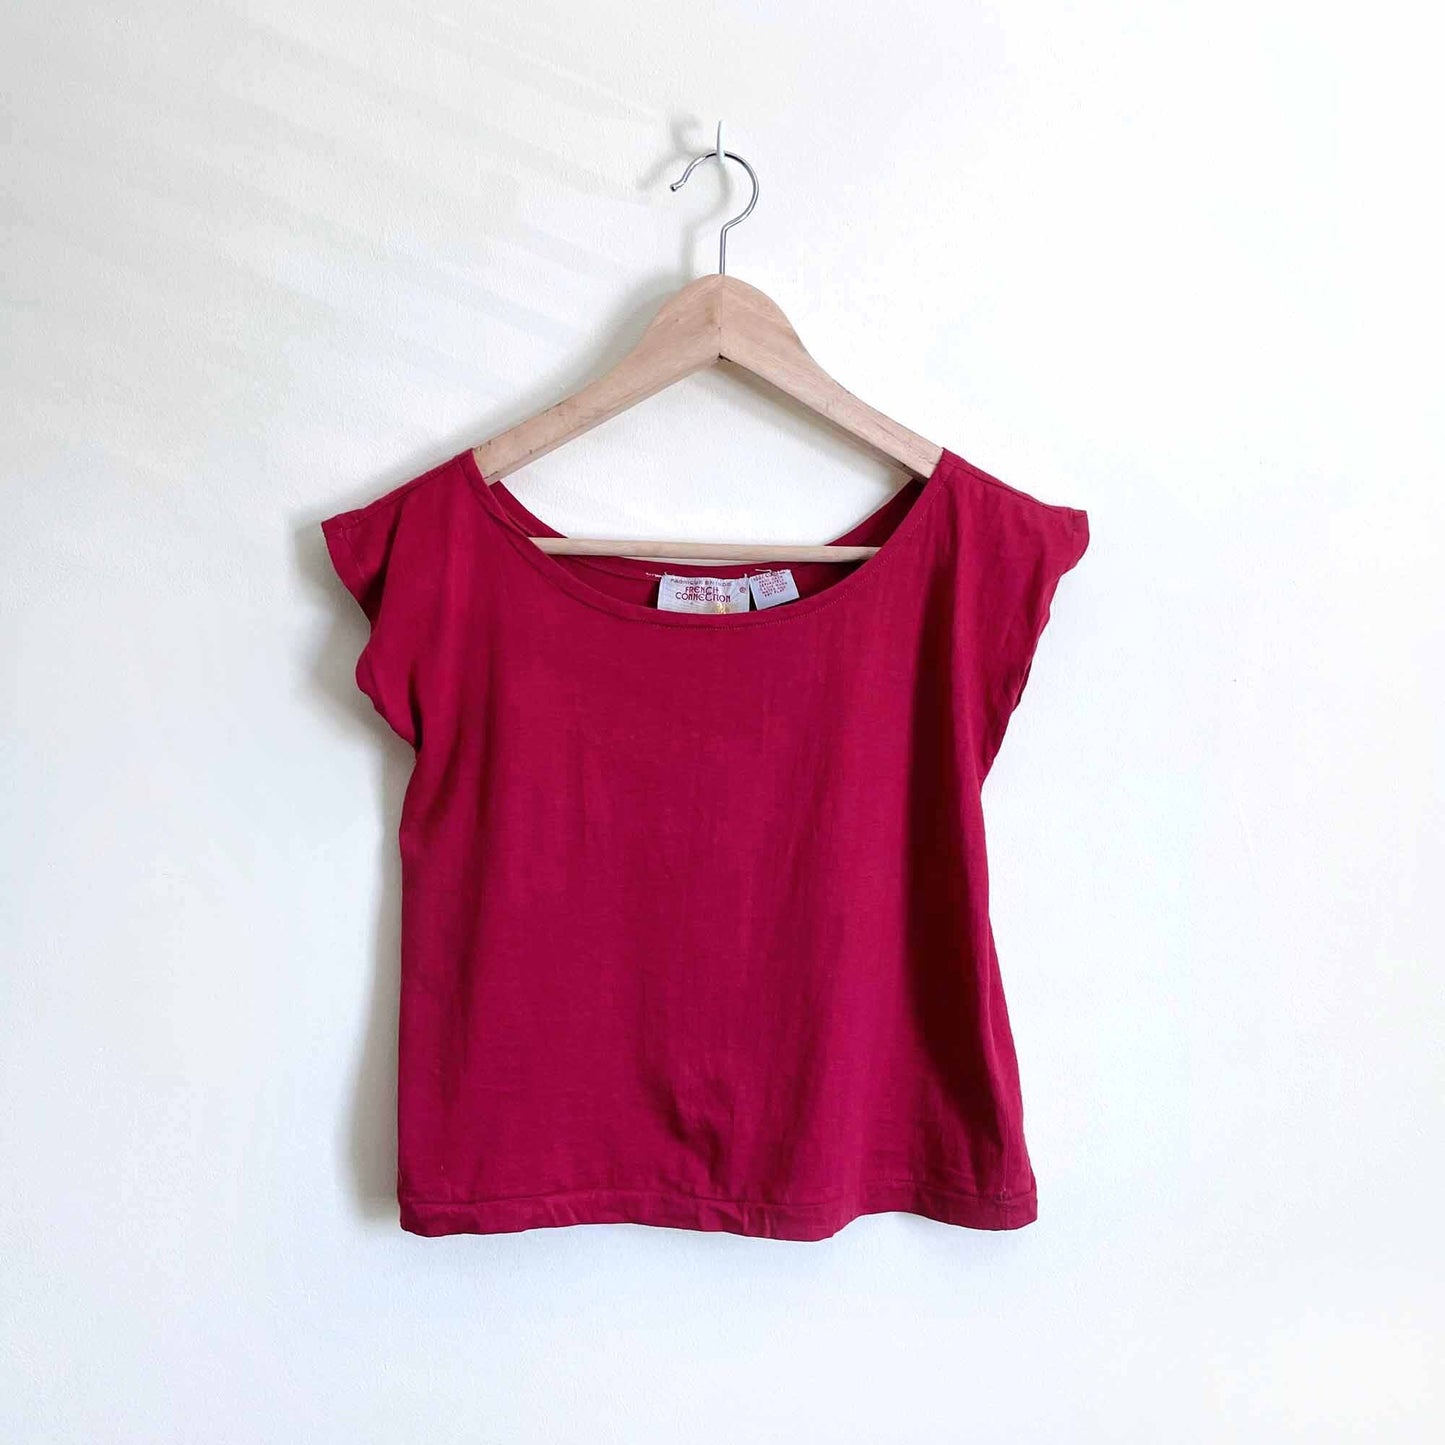 Vintage French Connection cropped tee - size Small